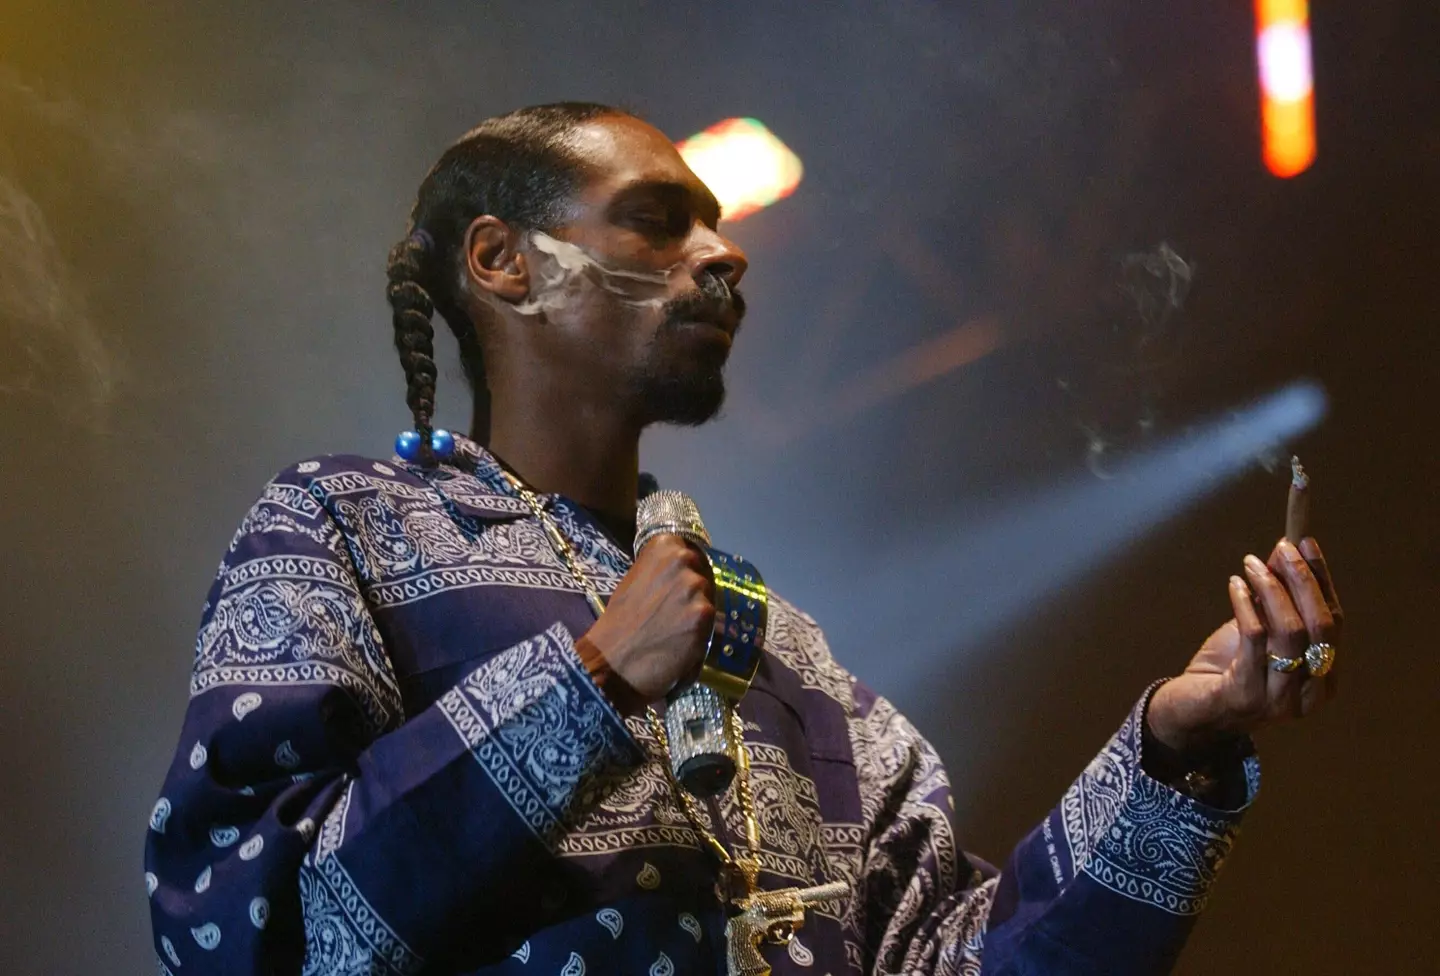 It’s no surprise that Snoop Dogg is stoner royalty, but what is slightly flabbergasting is how young Snoop was when he first hit the blunt.